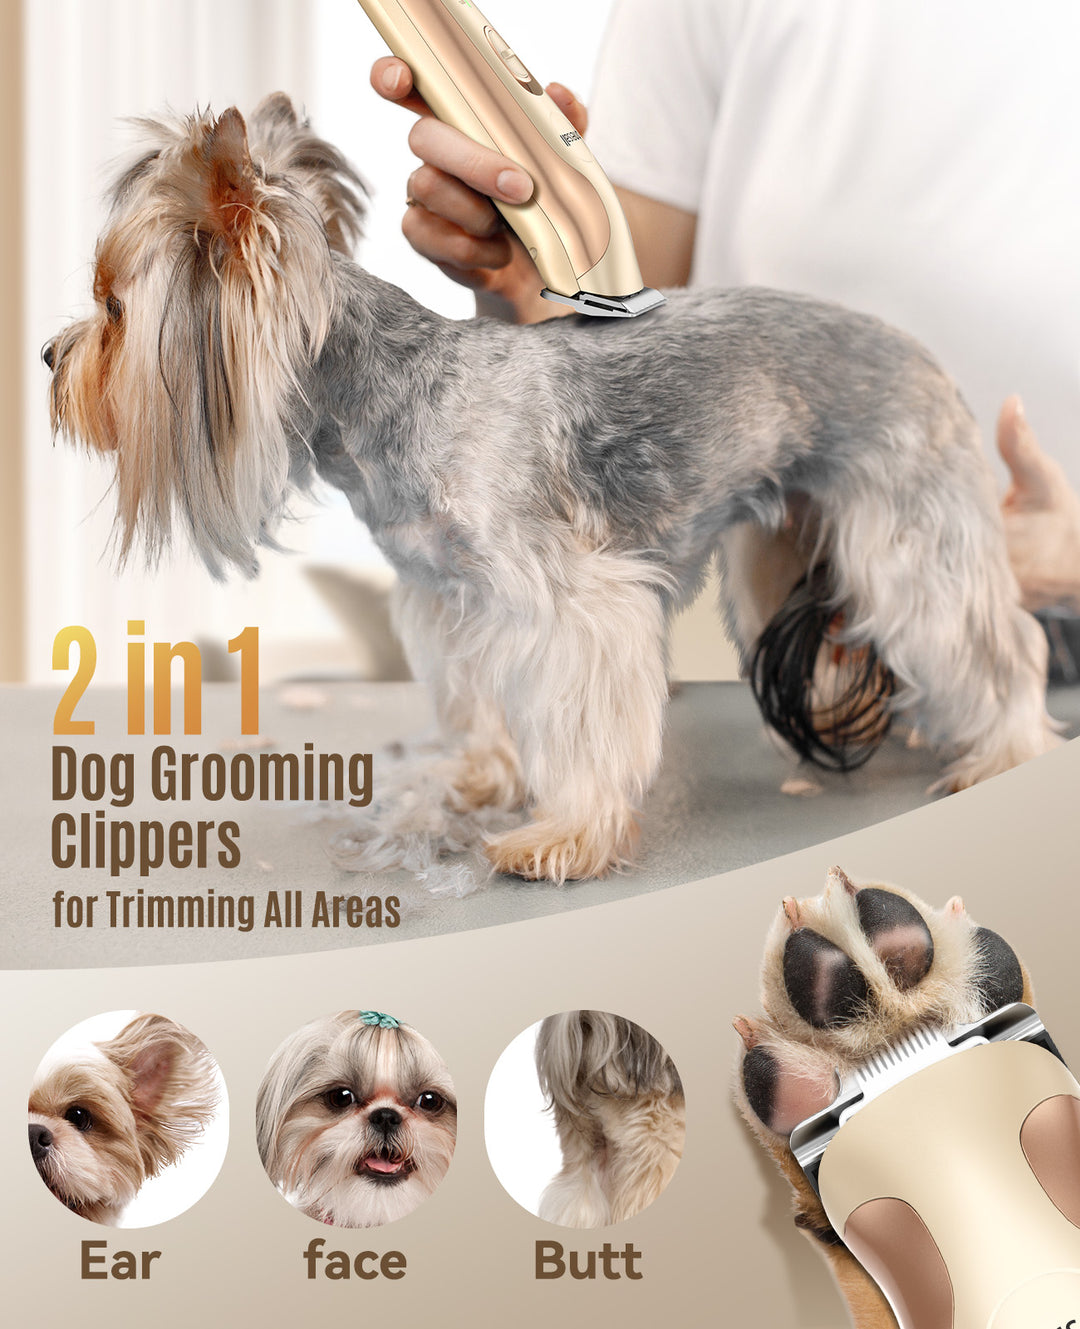 dog grooming clipper for trimming all areas